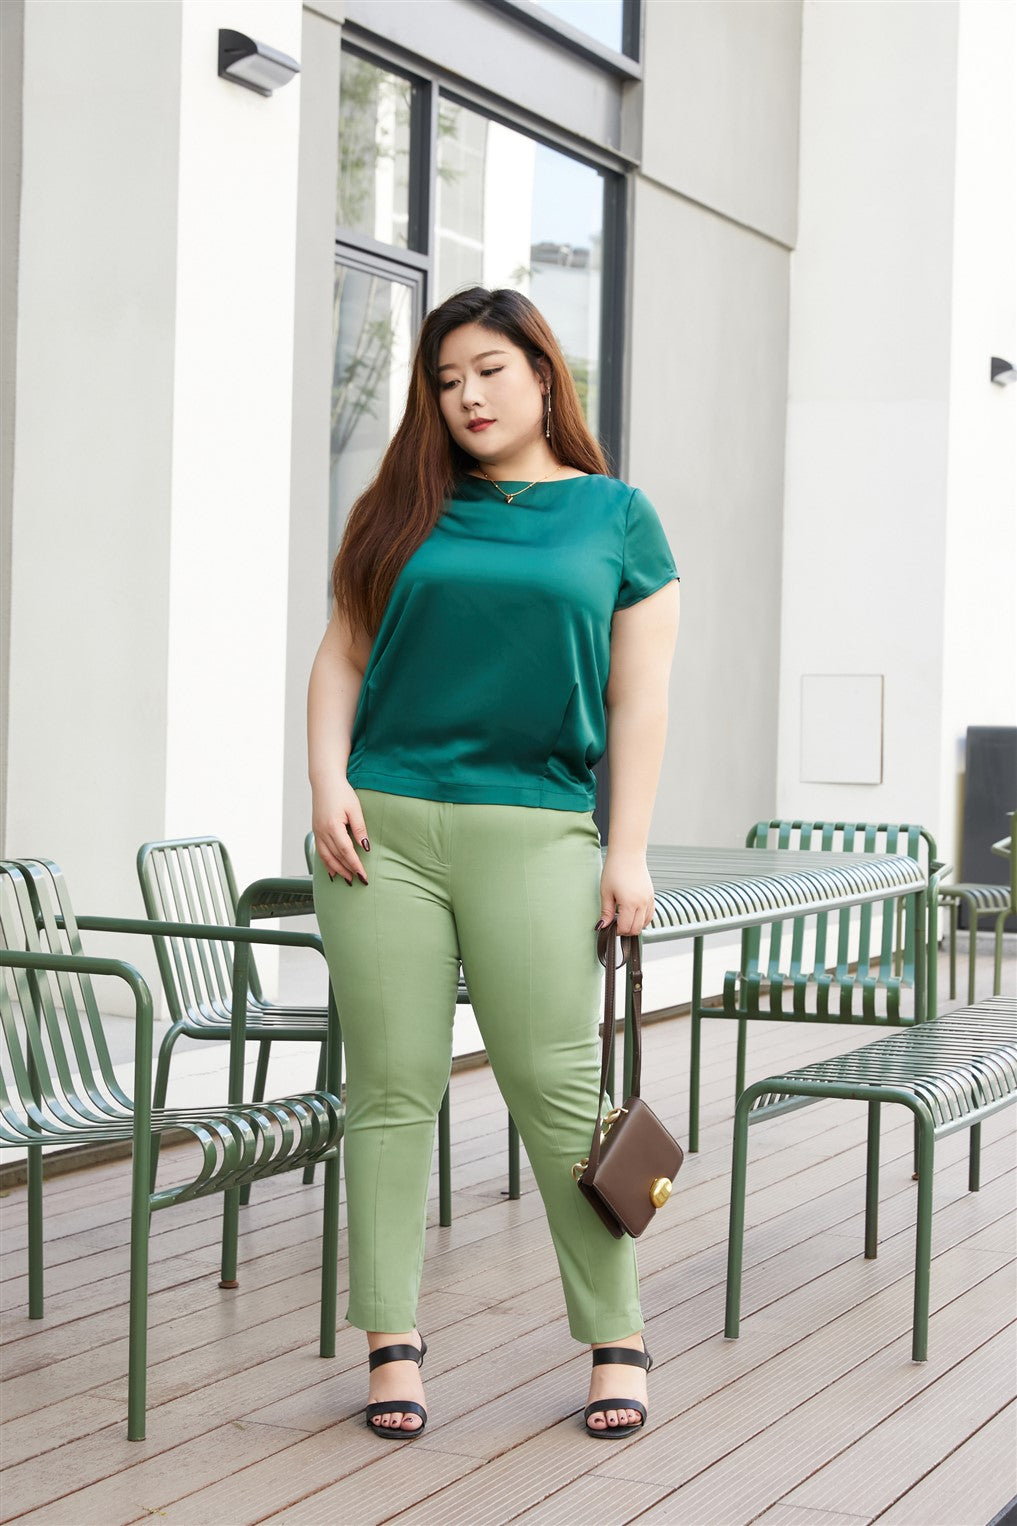 Paige Satin Top in Emerald